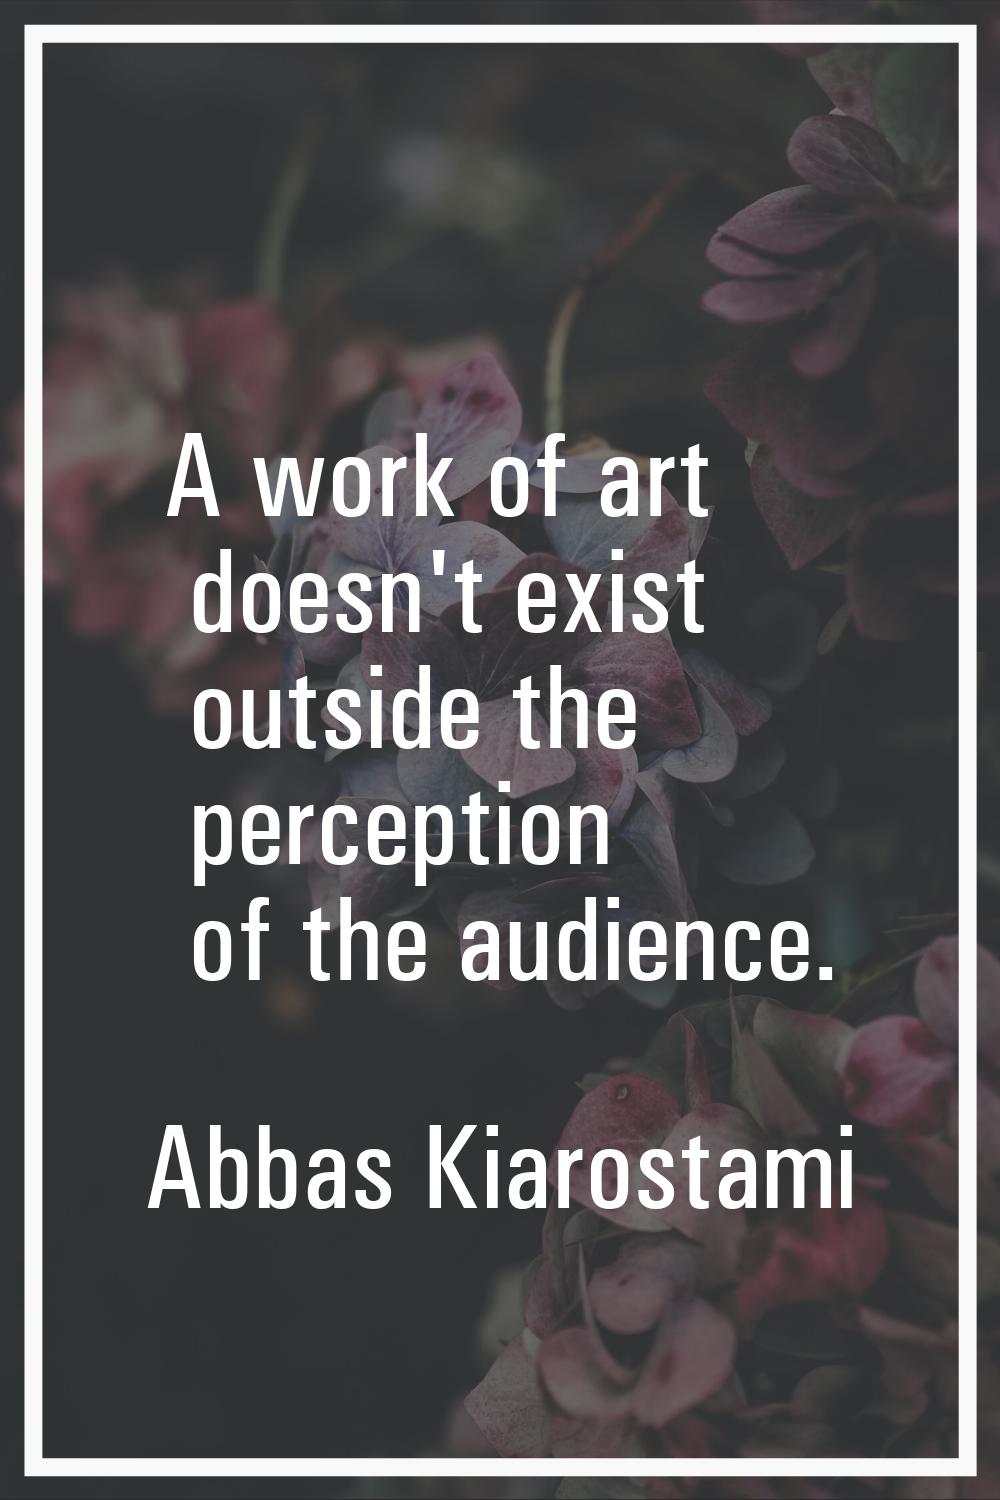 A work of art doesn't exist outside the perception of the audience.